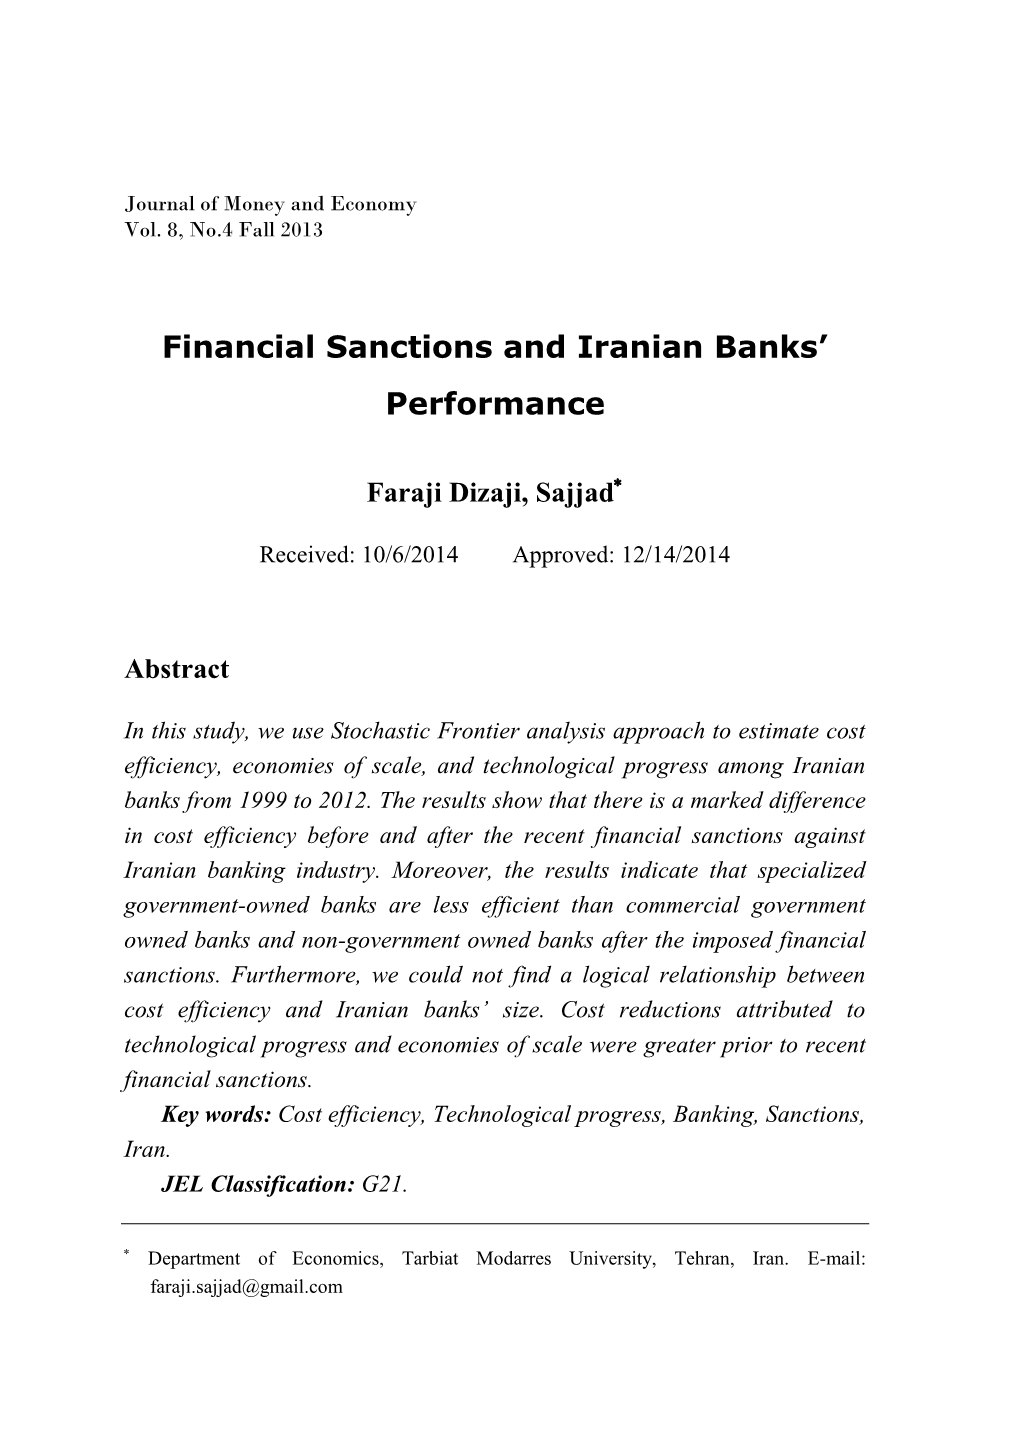 Financial Sanctions and Iranian Banks' Performance